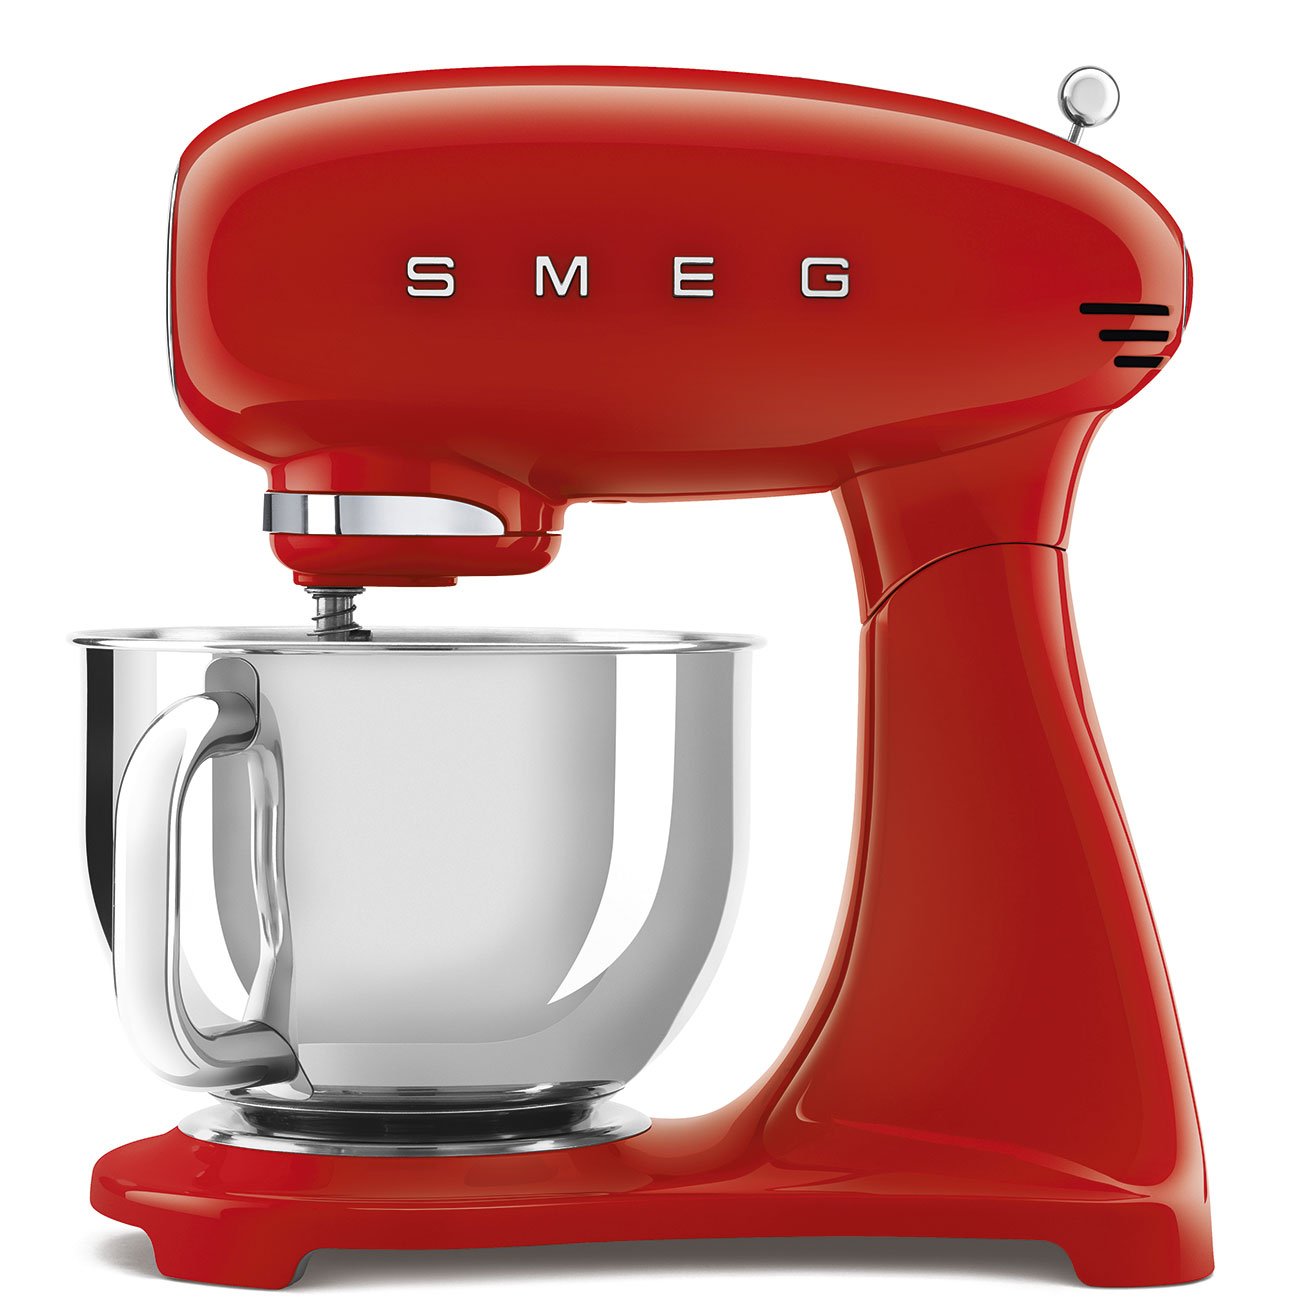 Smeg Accessories for Stand Mixer Pasta Roller